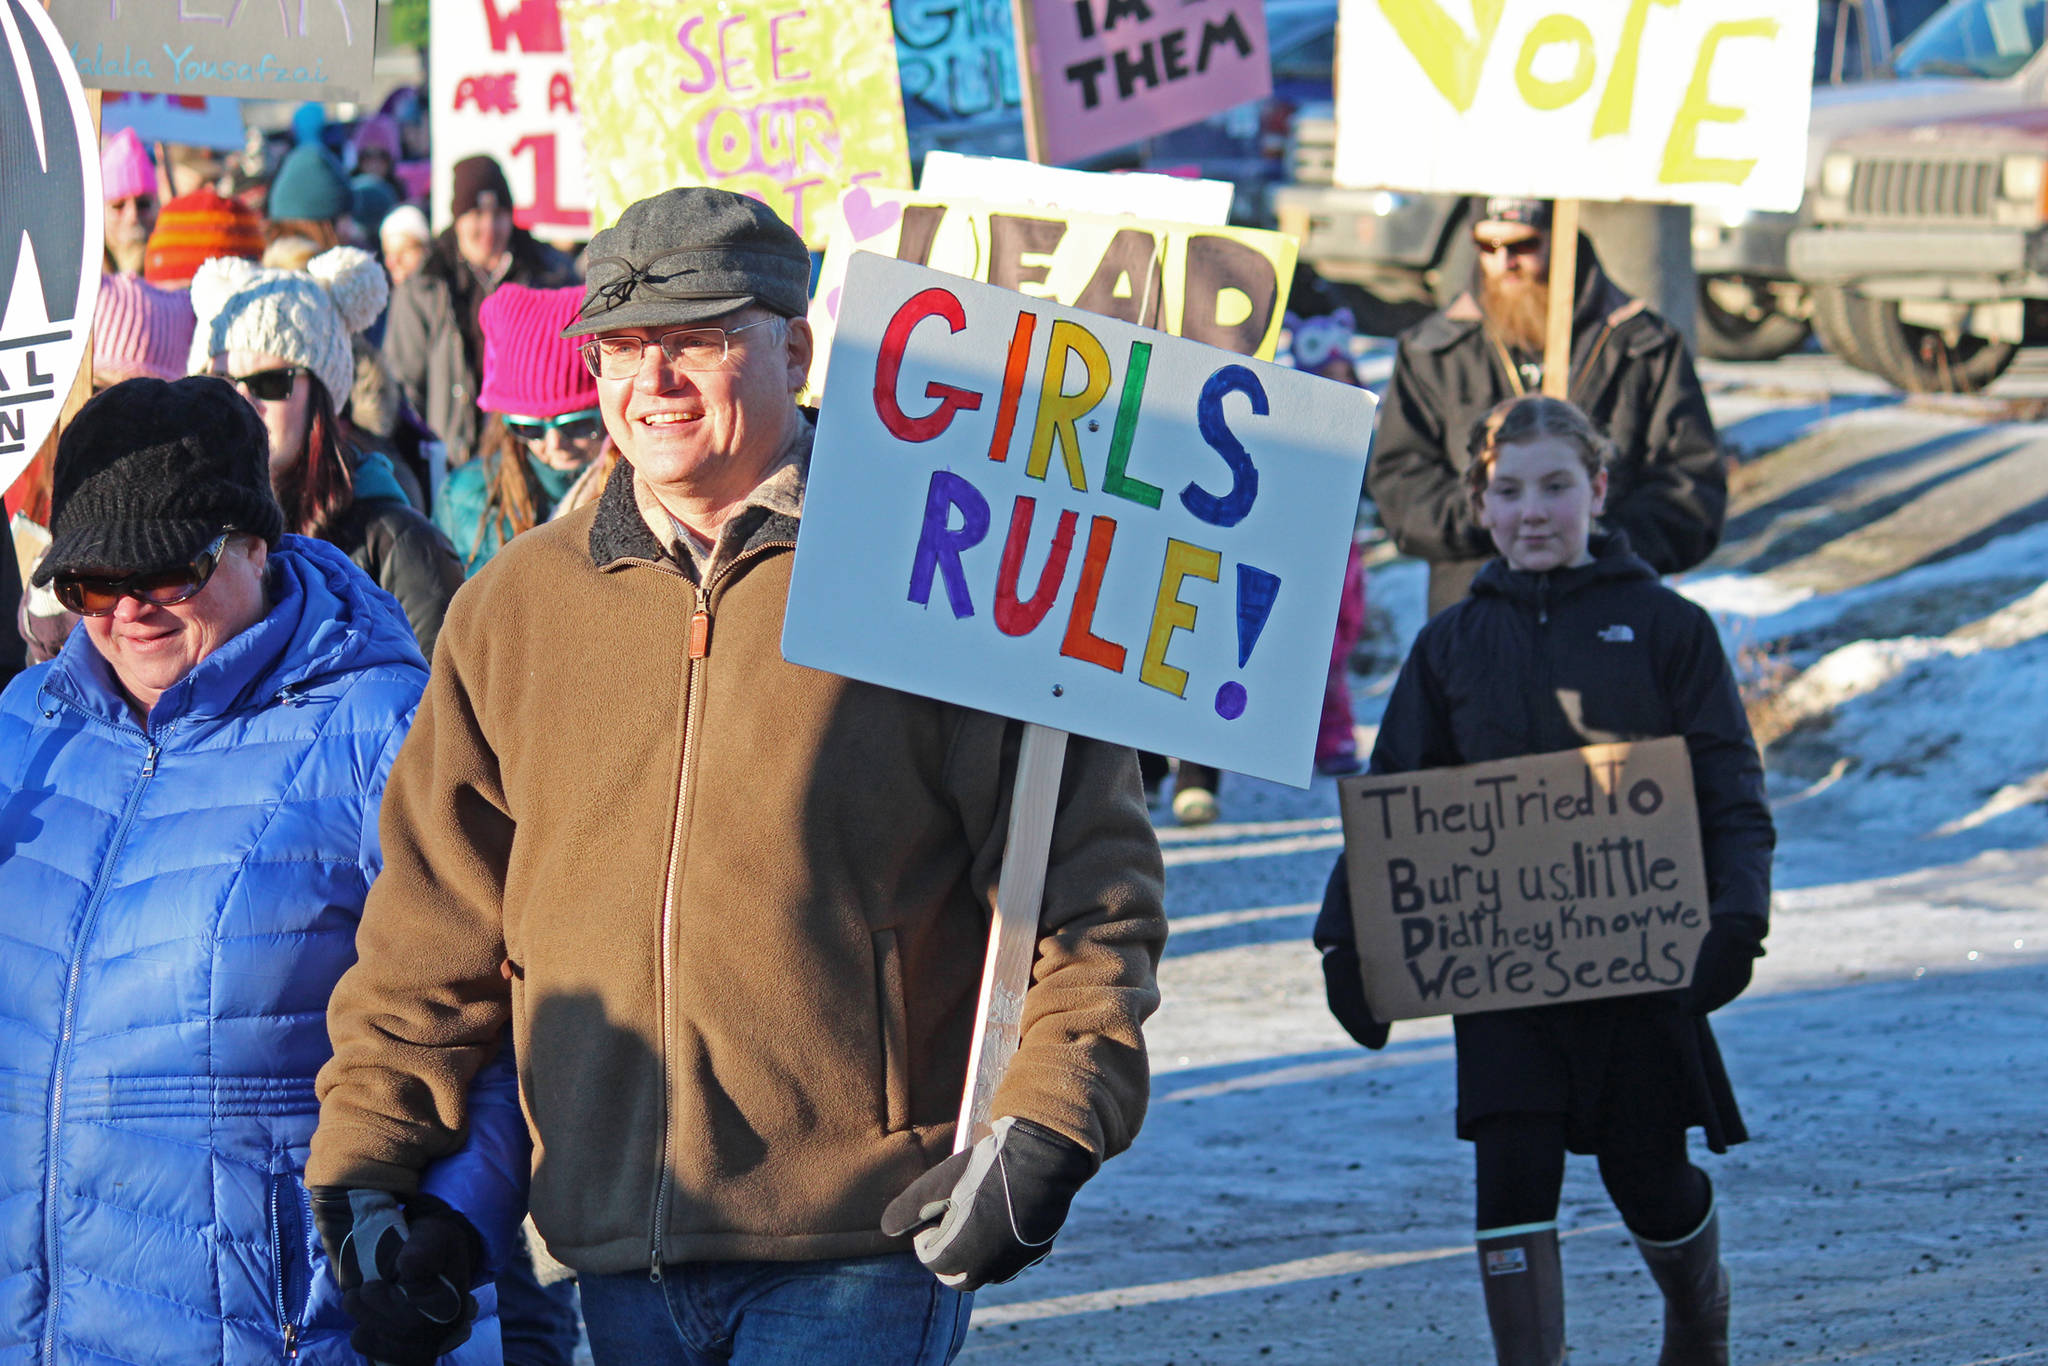 A man walks in the 2019 Women’s March on Homer while carrying a sign that reads “Girls Rule!” on Saturday, Jan. 19, 2019 in Homer, Alaska. (Photo by Megan Pacer/Homer News)